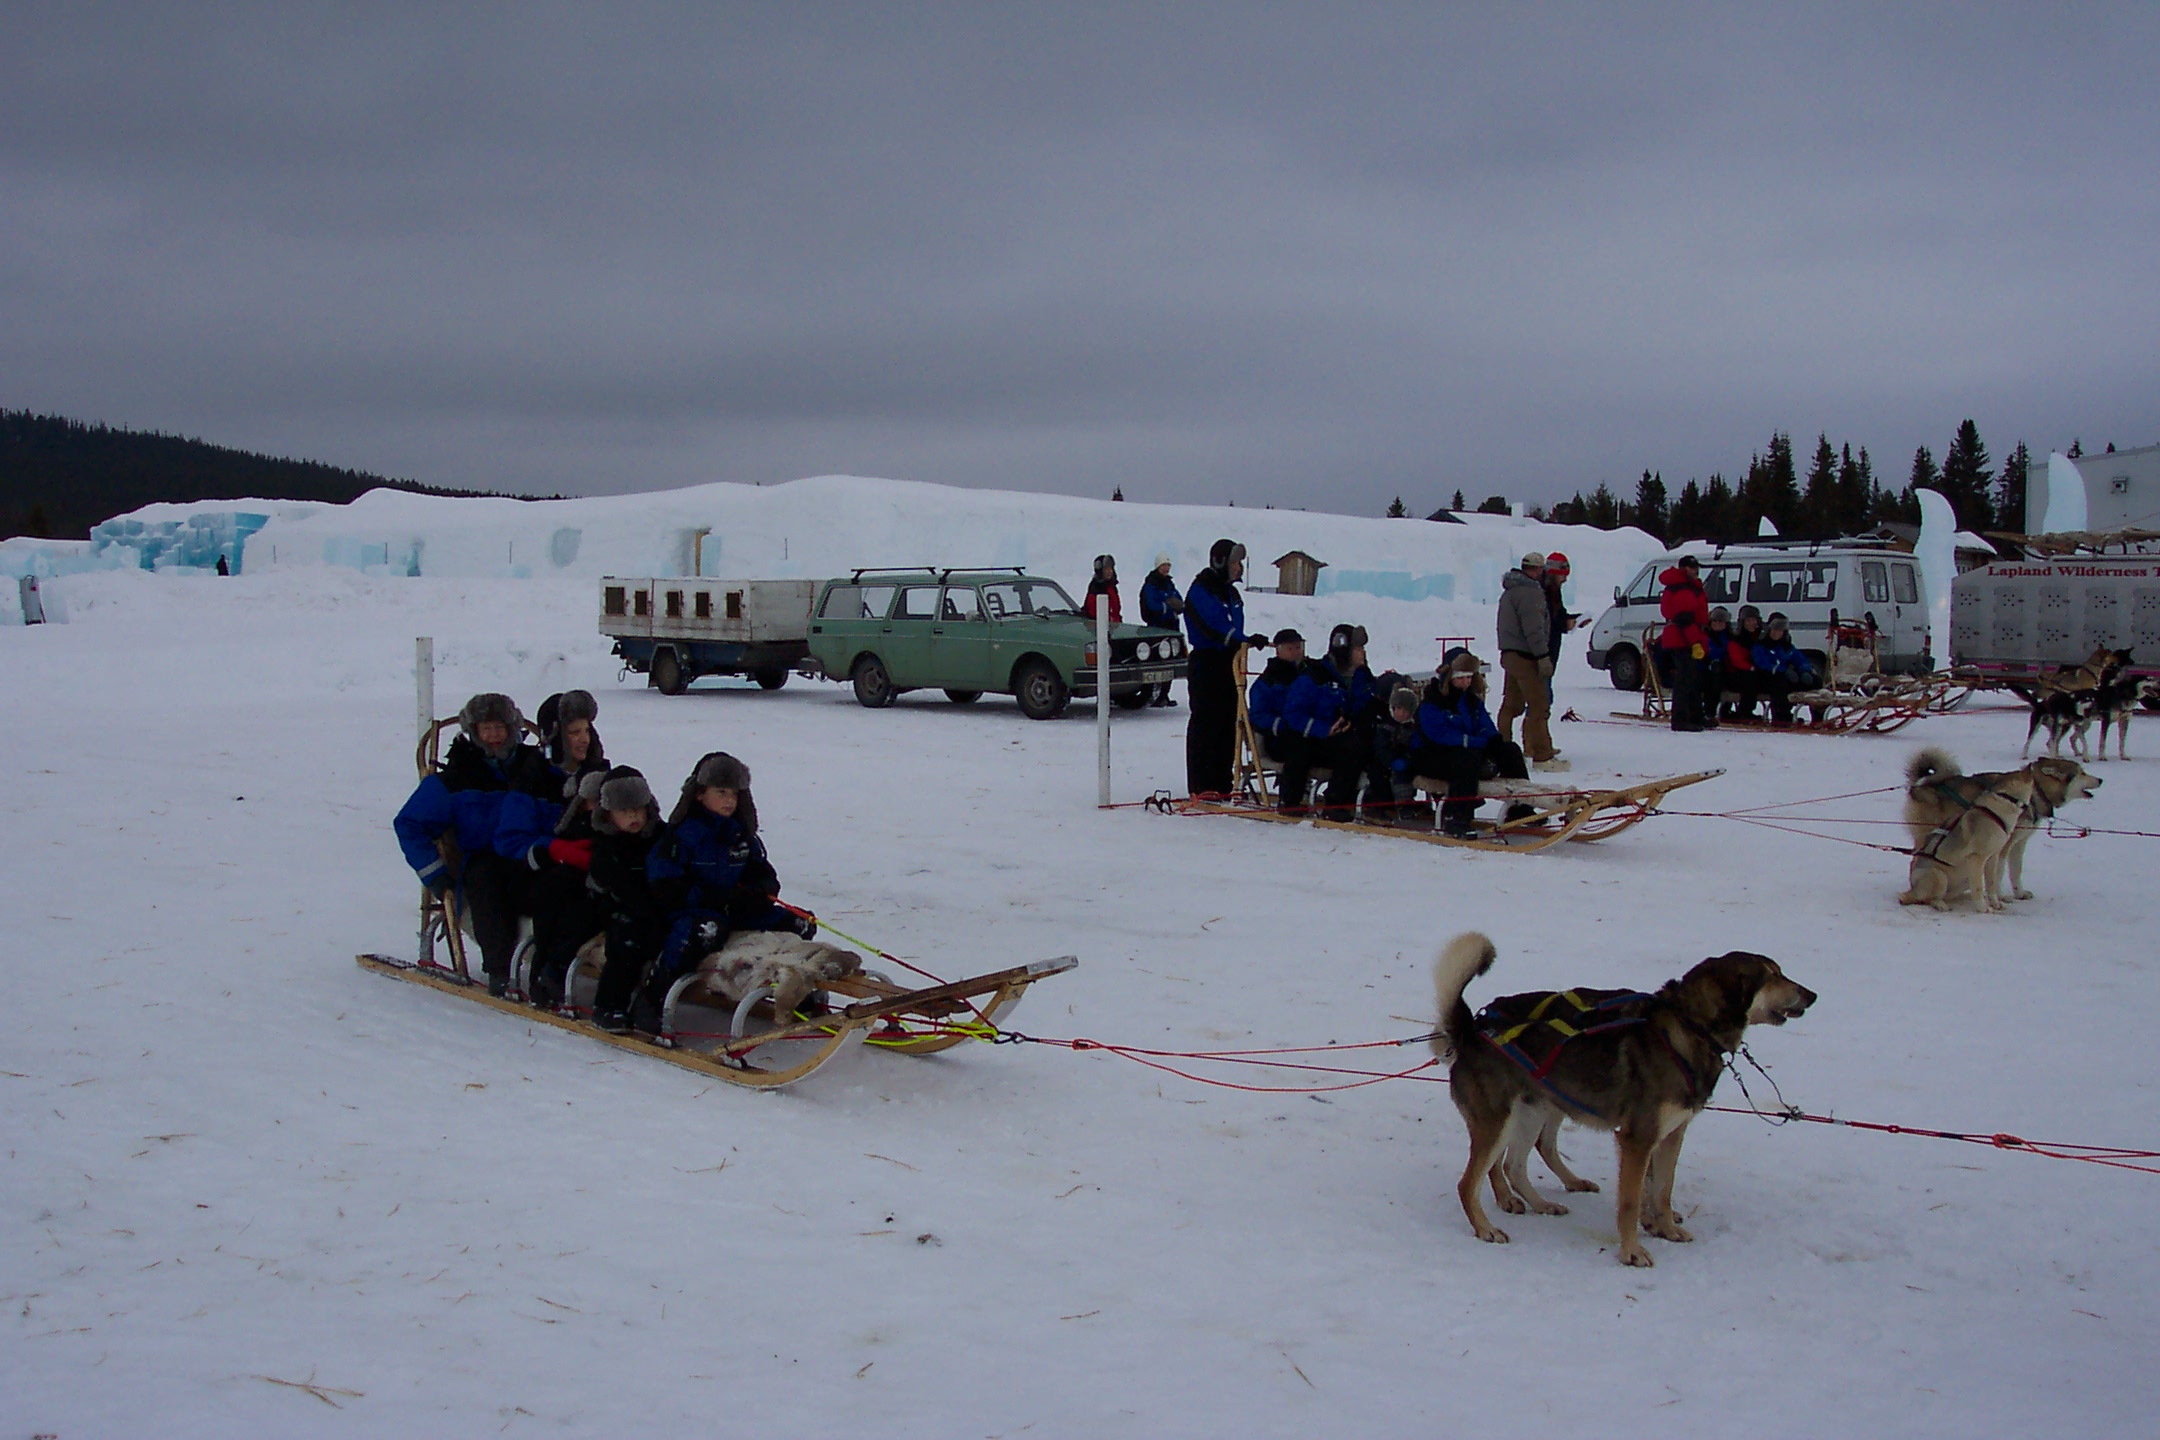 Time for our dog sled tour. Notice the Ice Hotel in the background